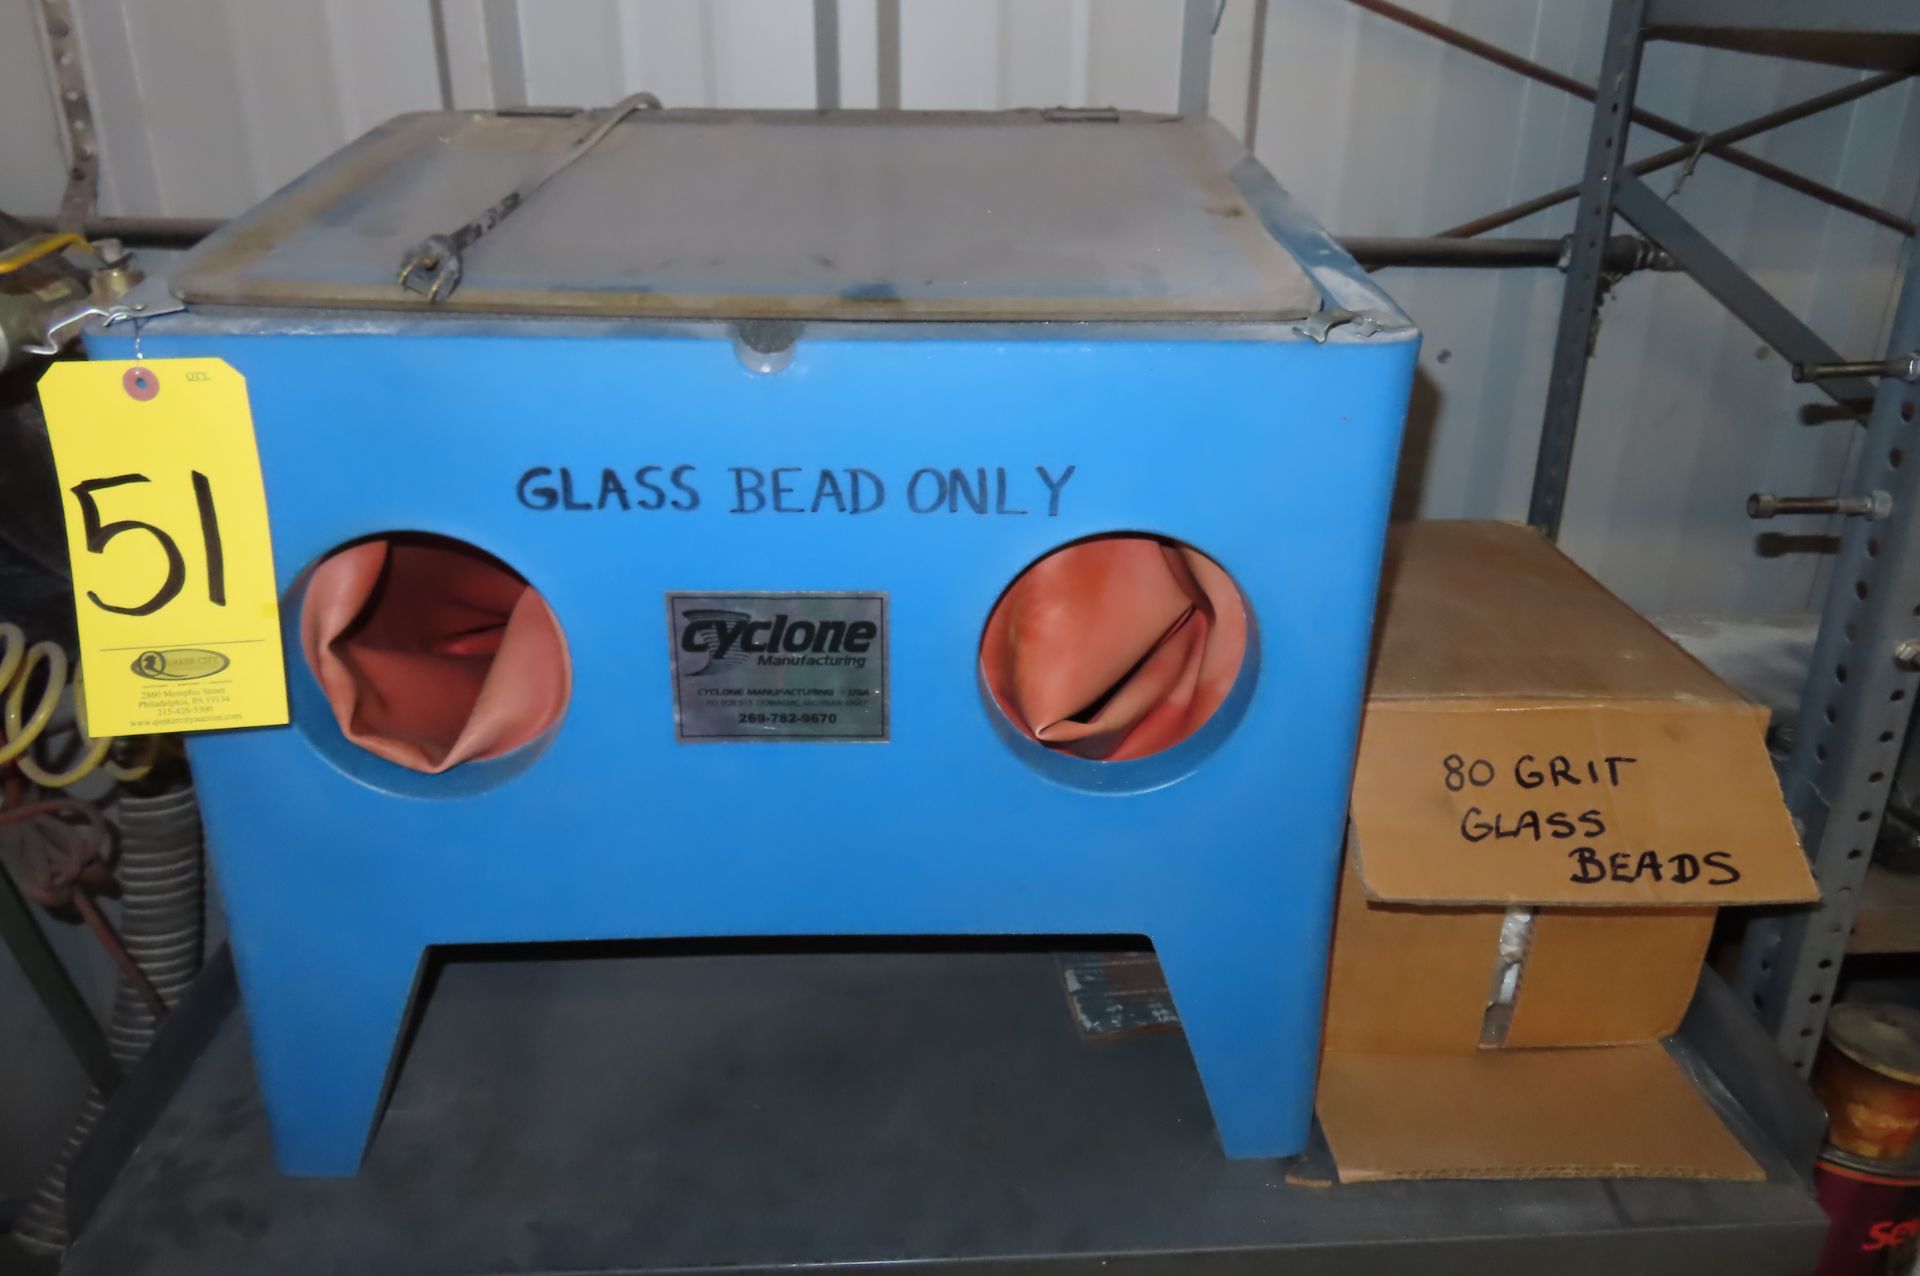 CYCLONE BENCHTOP GLASS BEAD CABINET WITH GRIT